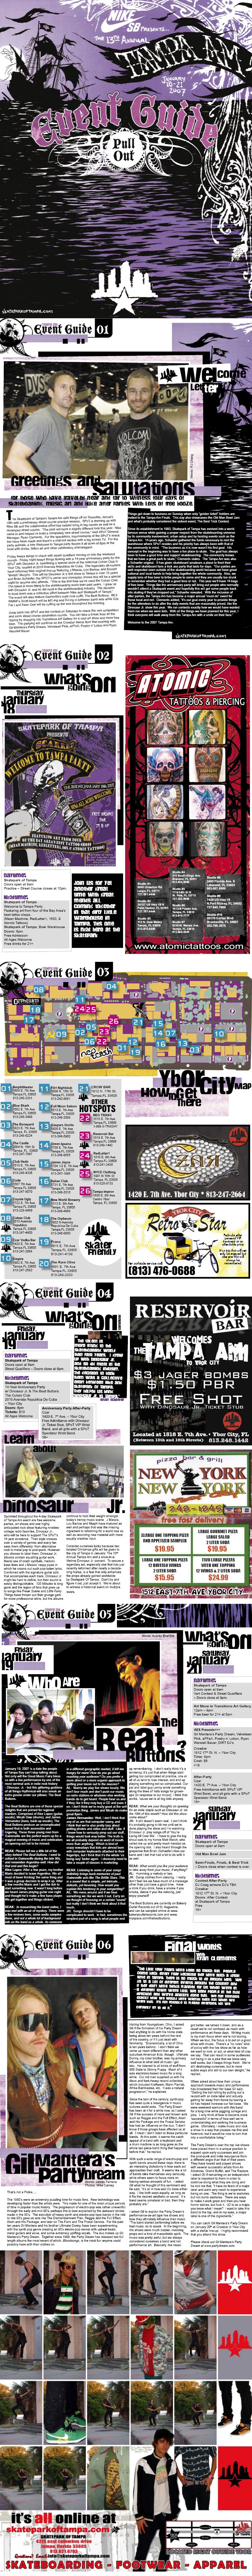 Reax Mag Event Guide For Tampa Am